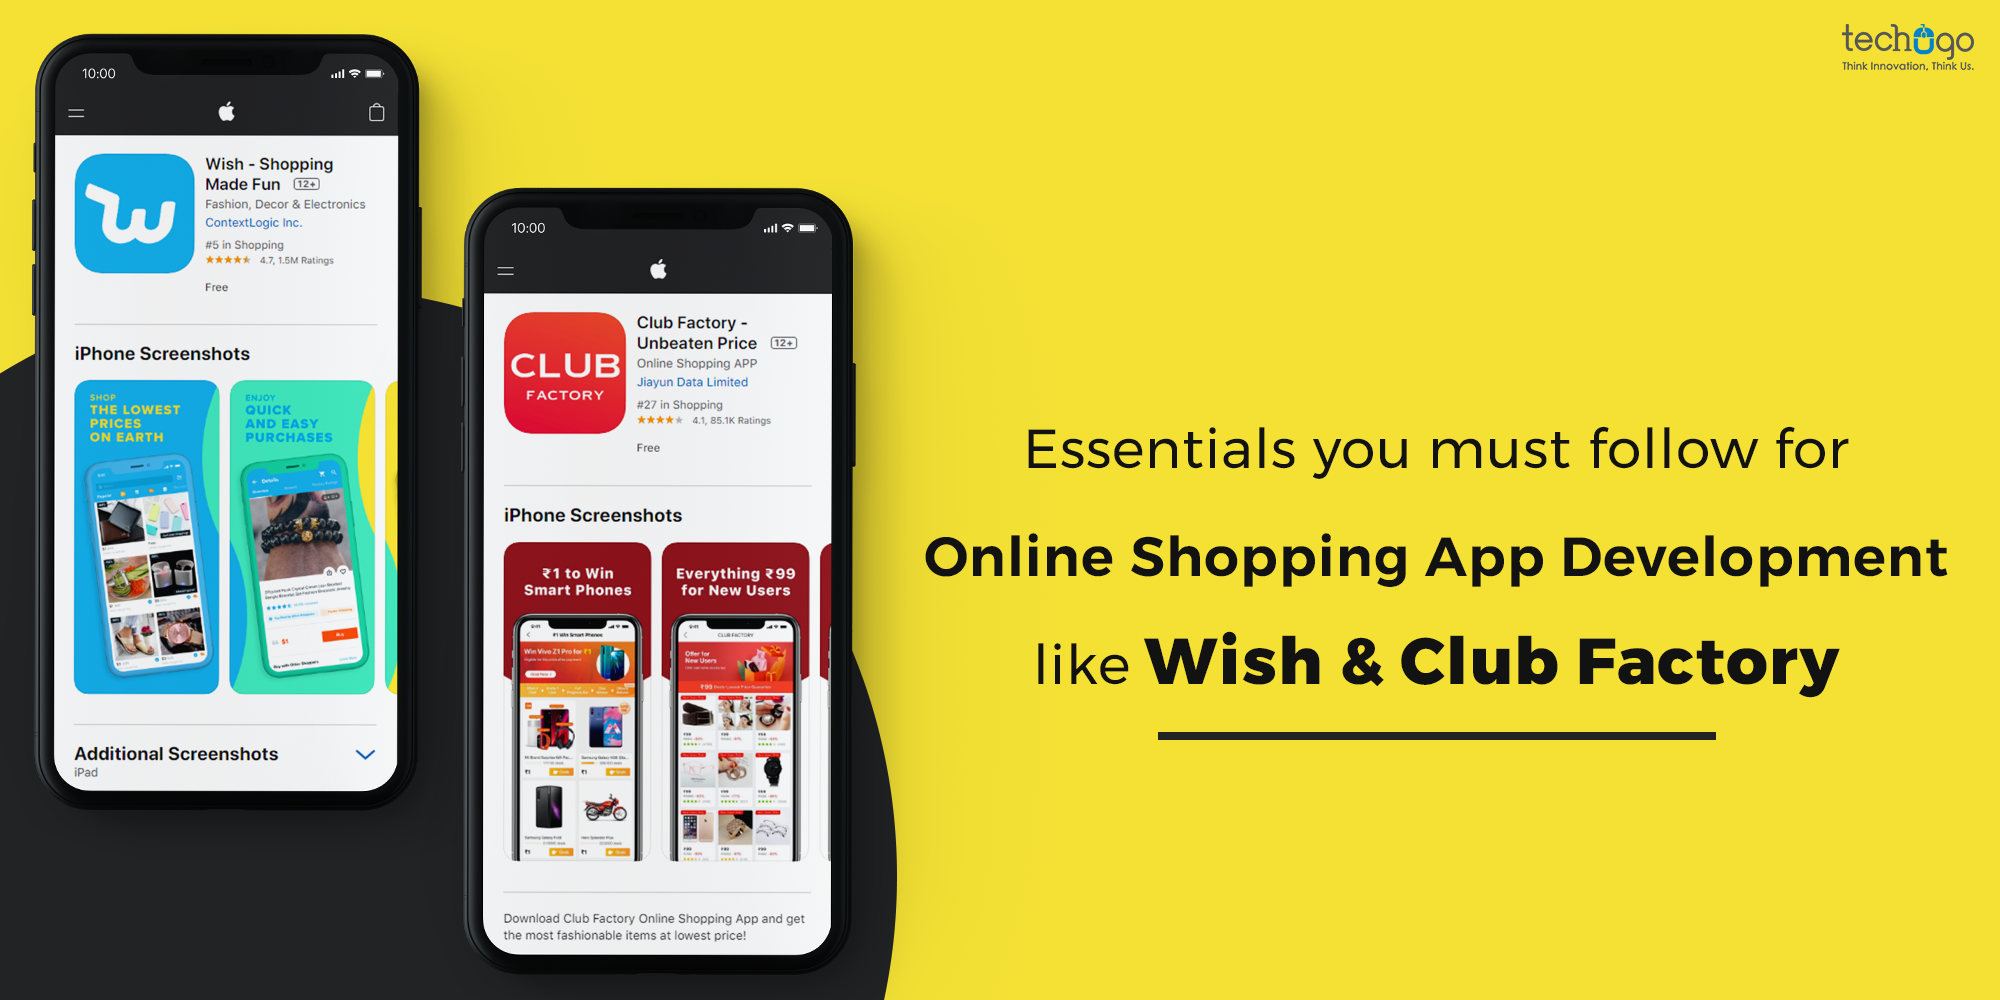 Essentials You Must Follow For Online Shopping App Development Like Wish & Club Factory